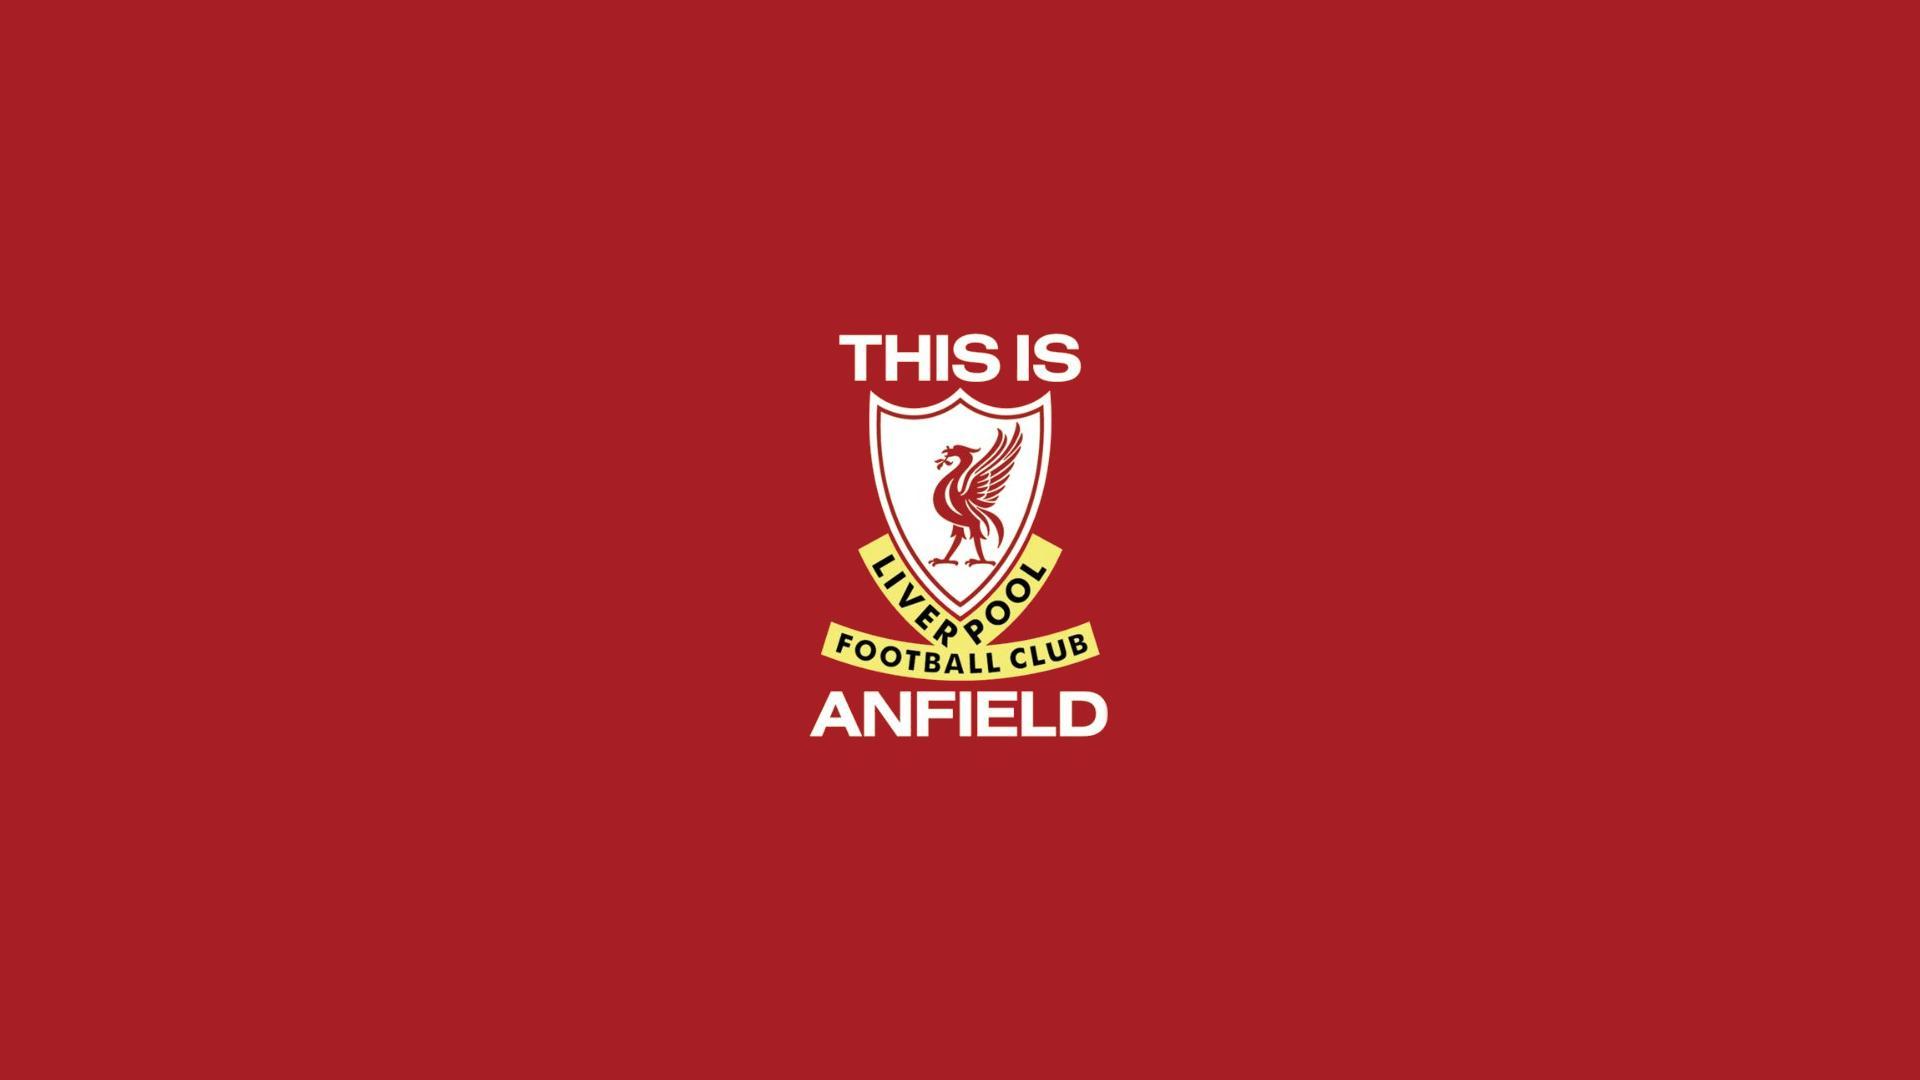 Anfield this is Liverpool: Klopp